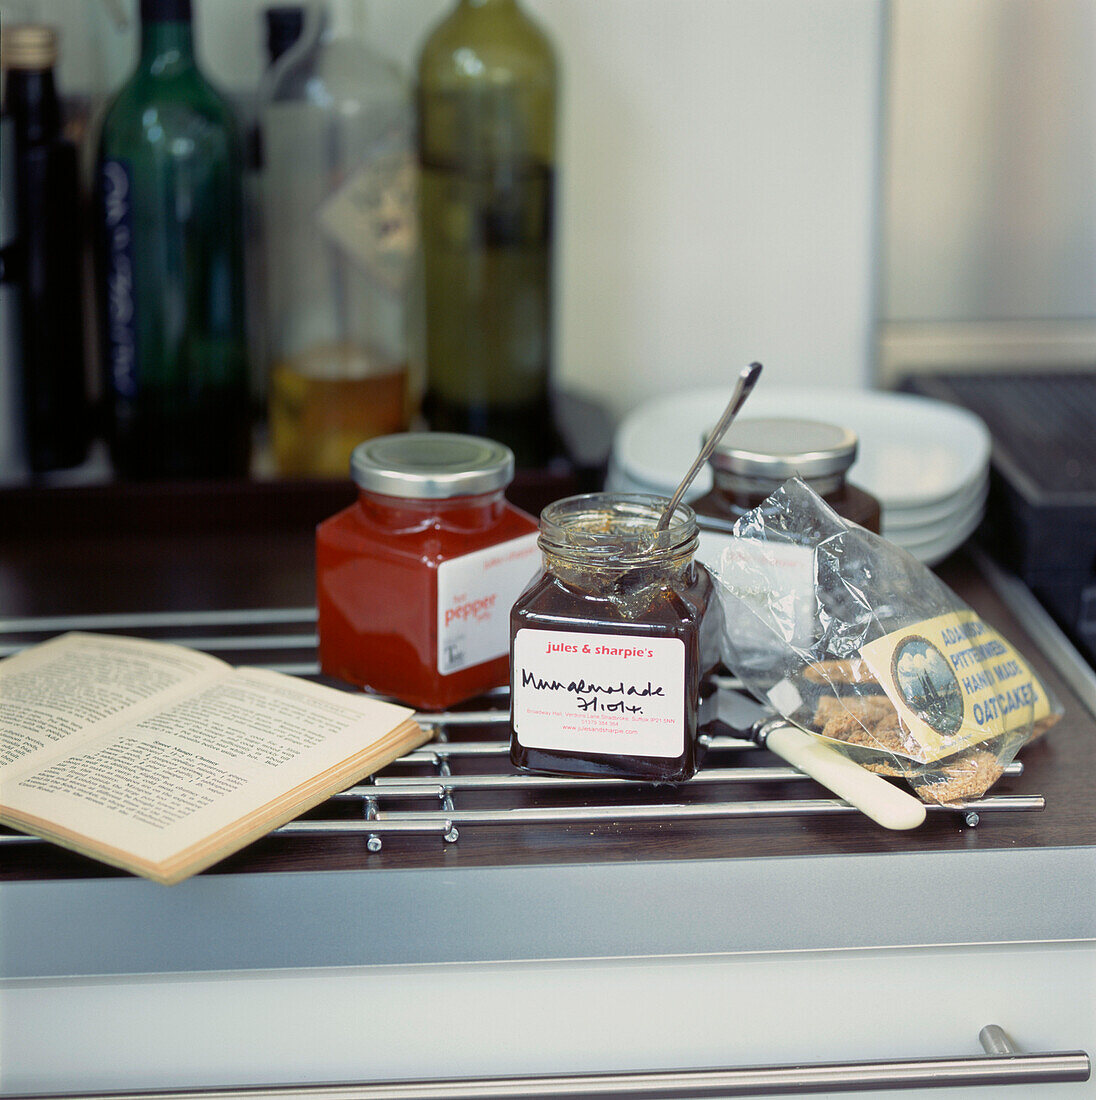 Kitchen worktop with preserves and jams and condiments